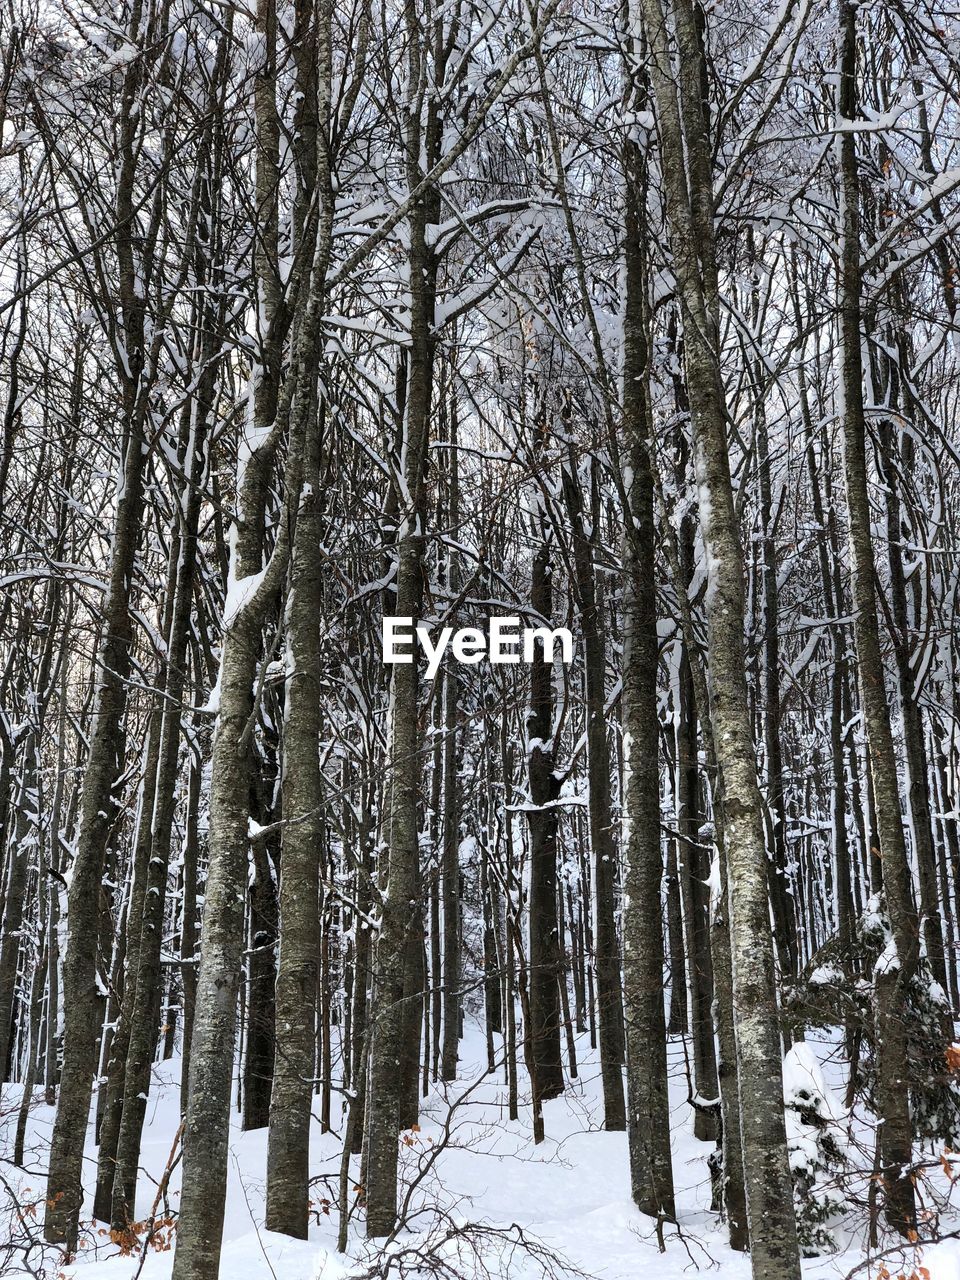 LOW ANGLE VIEW OF BARE TREES IN SNOW